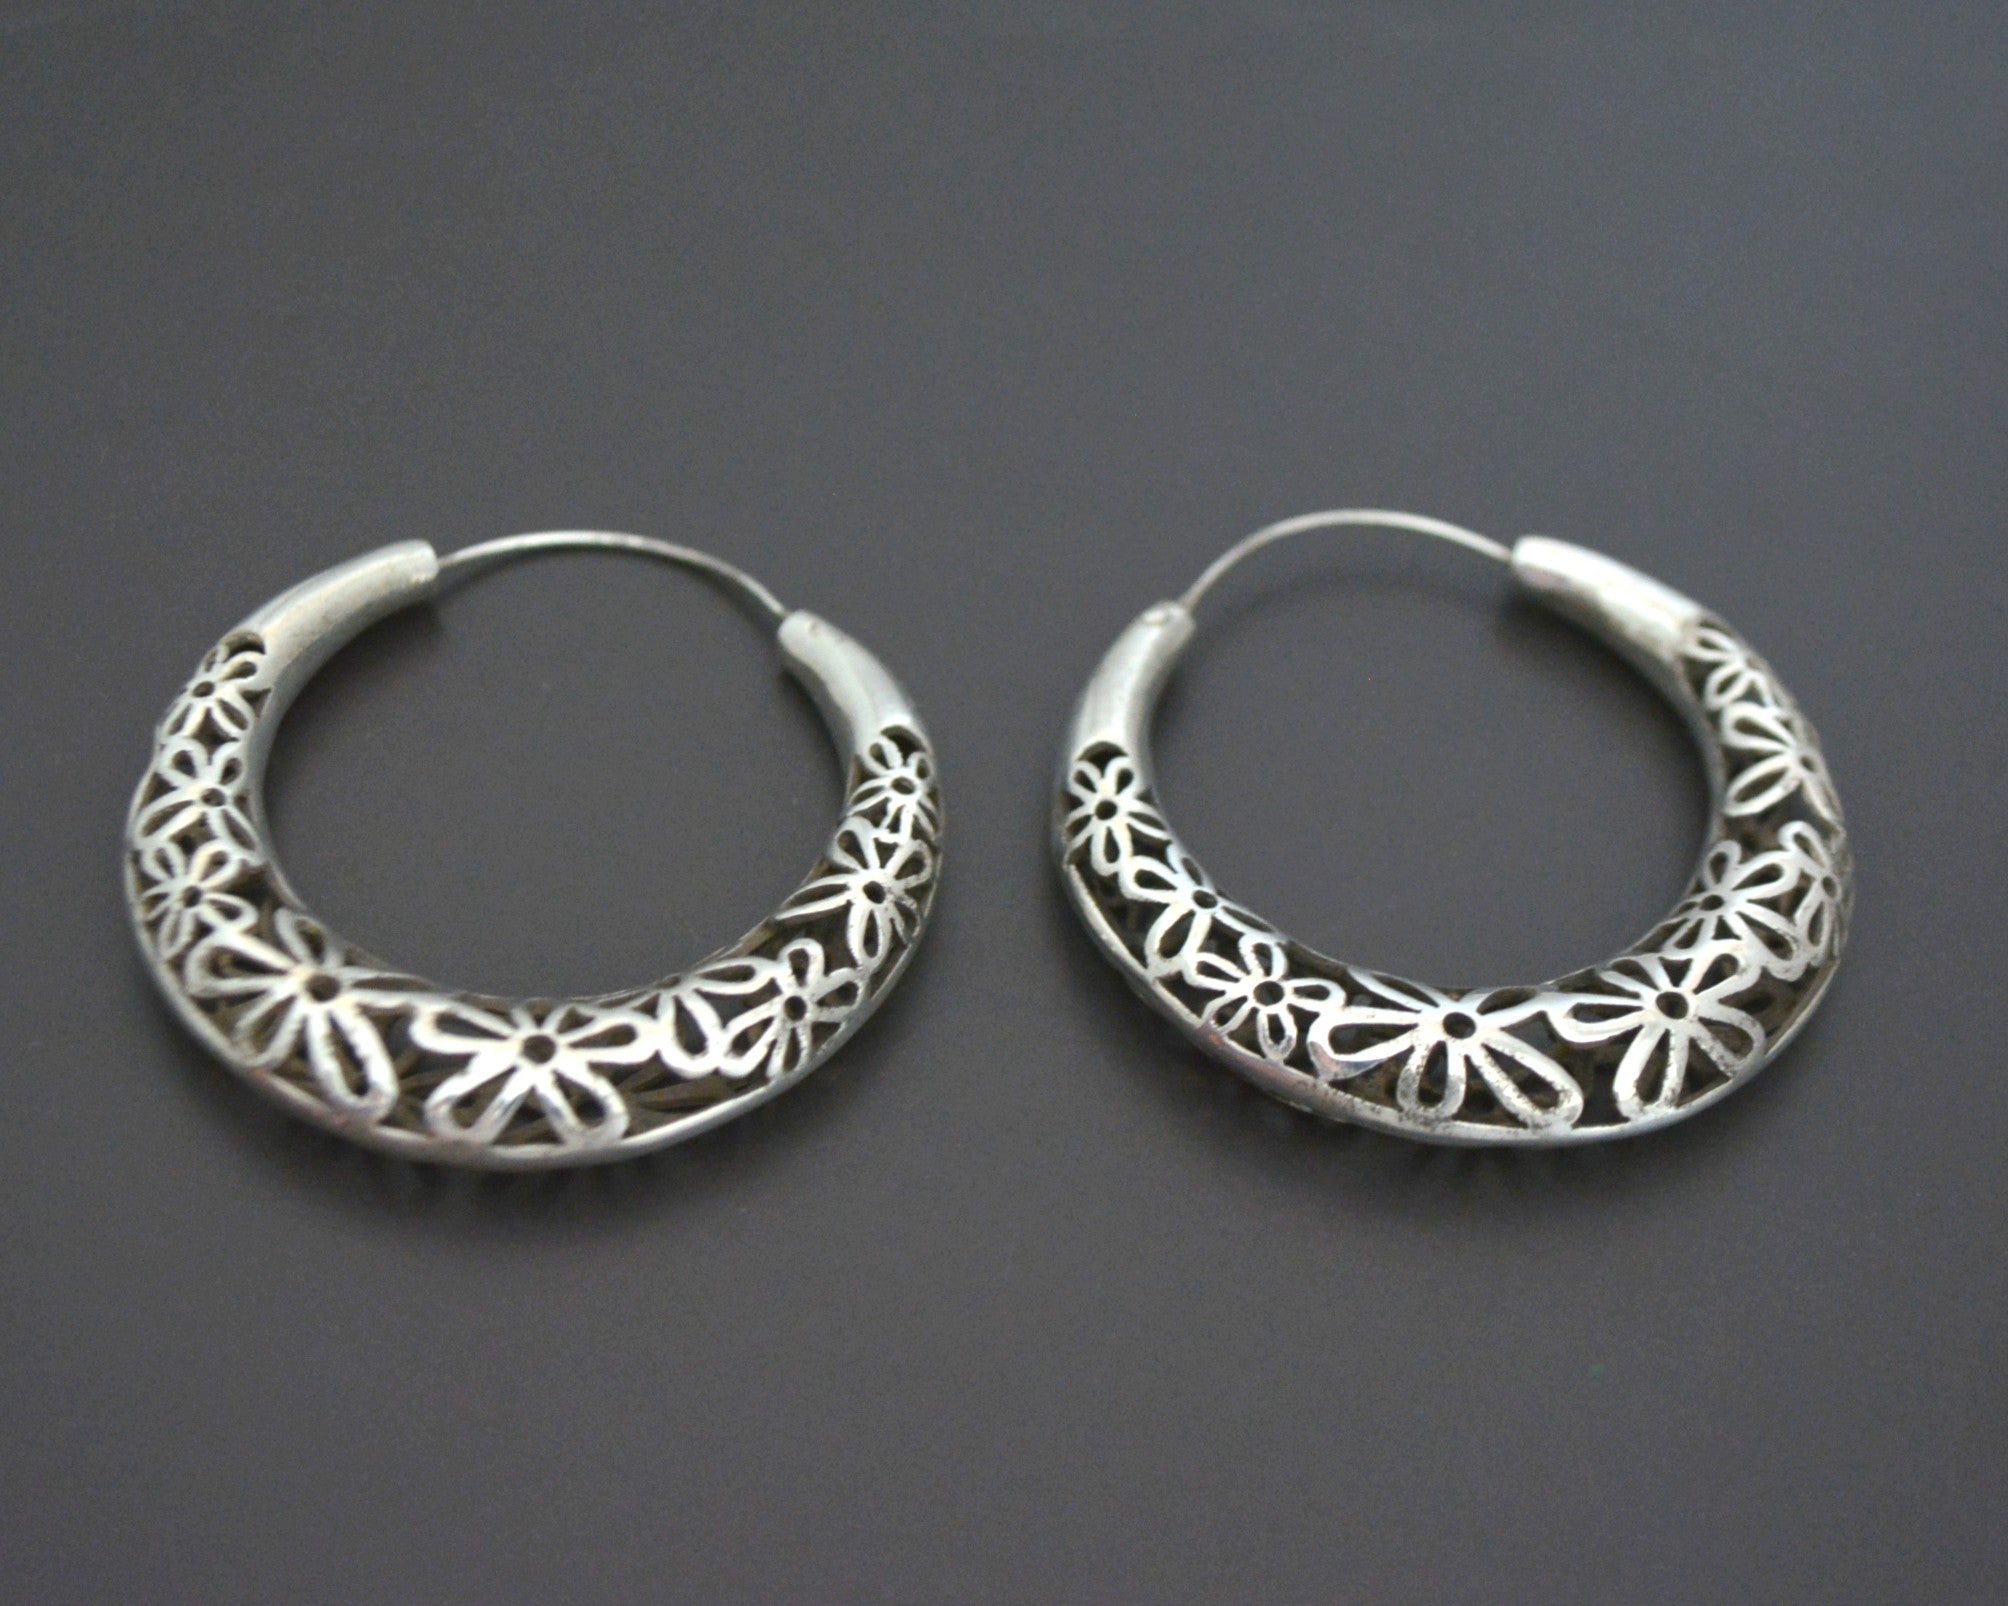 Large Ethnic Hoop Earrings with Flower Cut Out Design